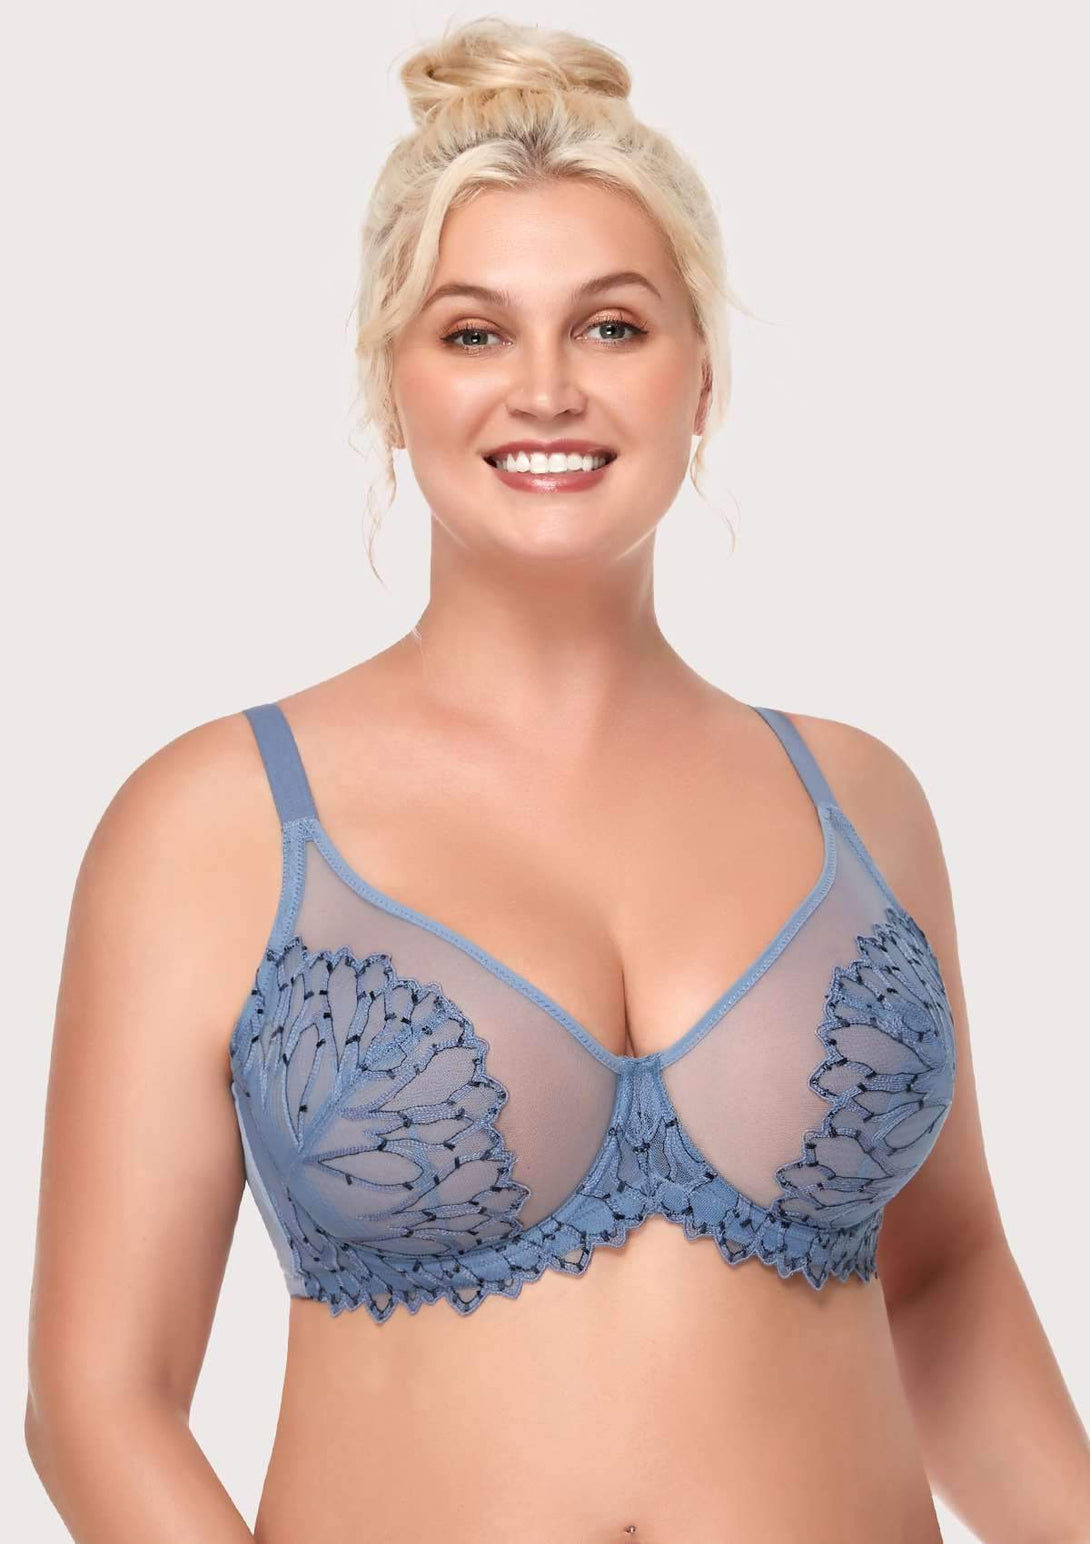  Womens Wireless Plus Size Lace Bra Unlined Full Coverage  Comfort Cotton Oatmeal Heather 38DD